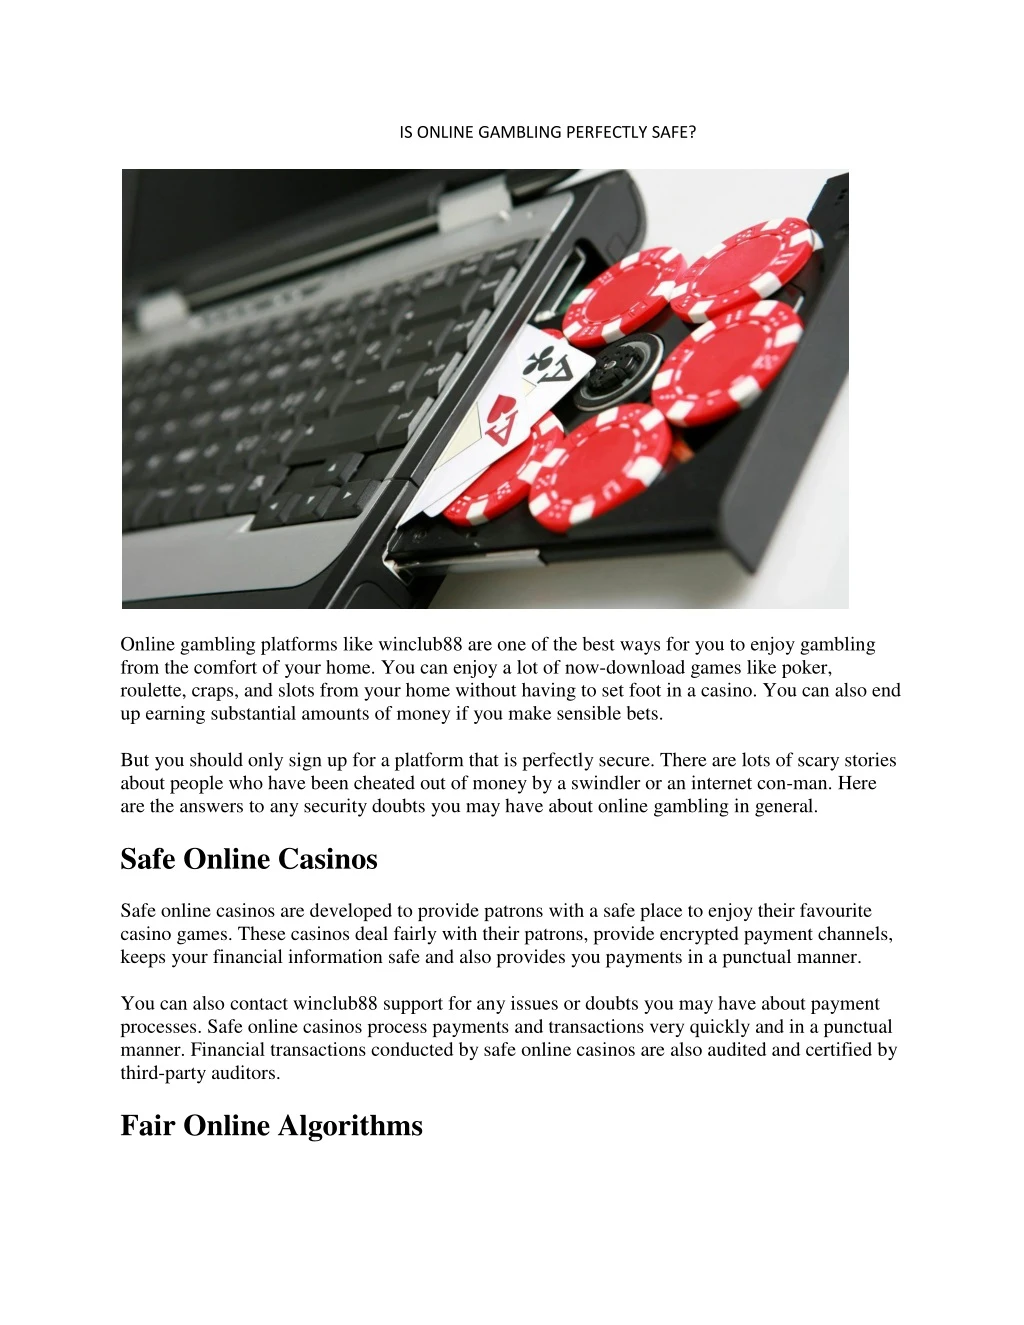 is online gambling perfectly safe